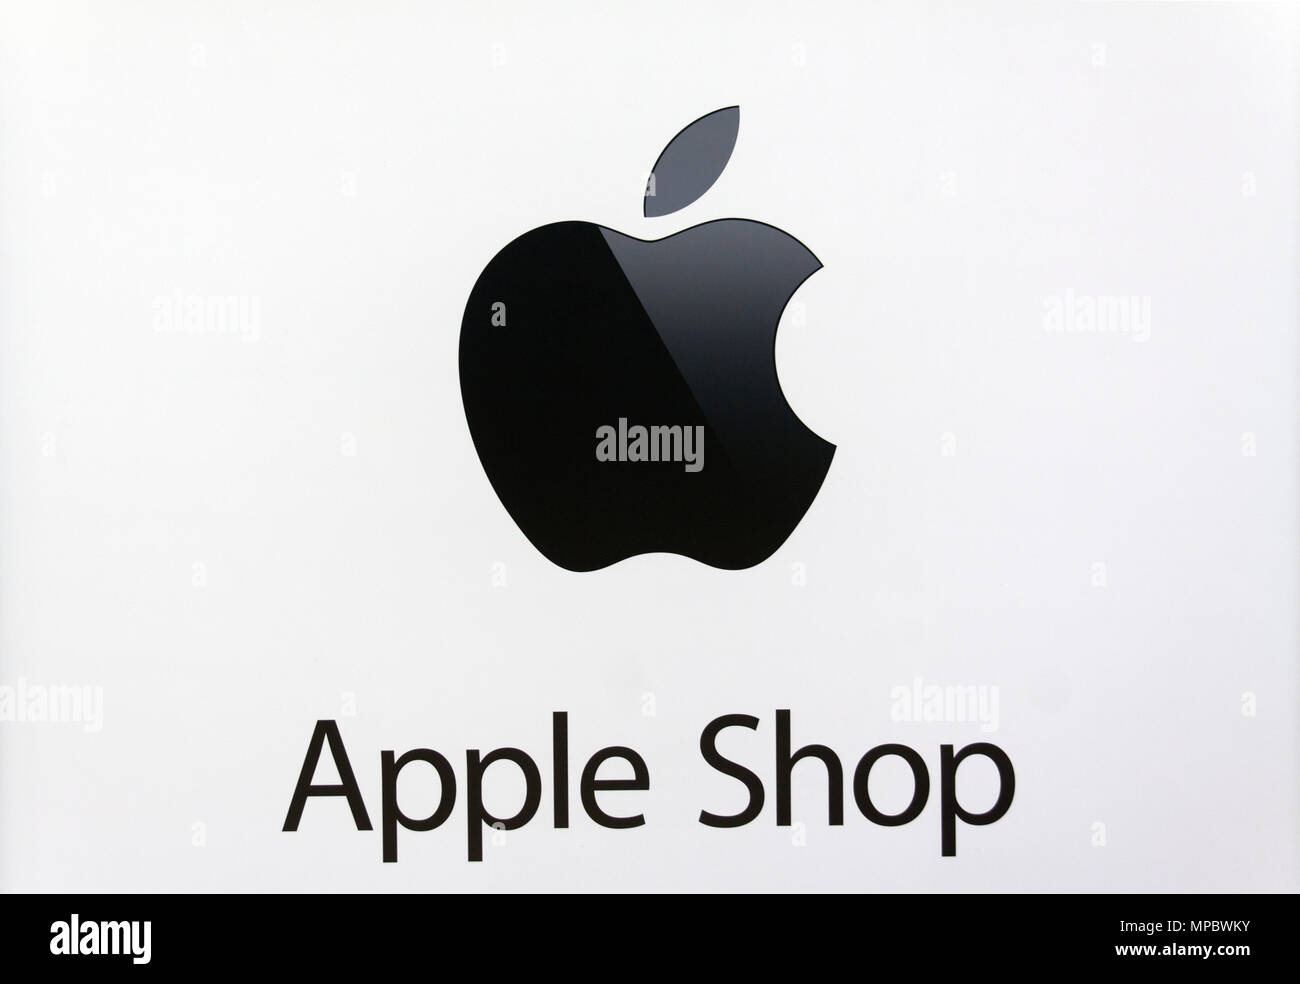 Amsterdam,netherlands-april 28, 2015: Apple shop in Amsterdam, store for electonic devices Stock Photo